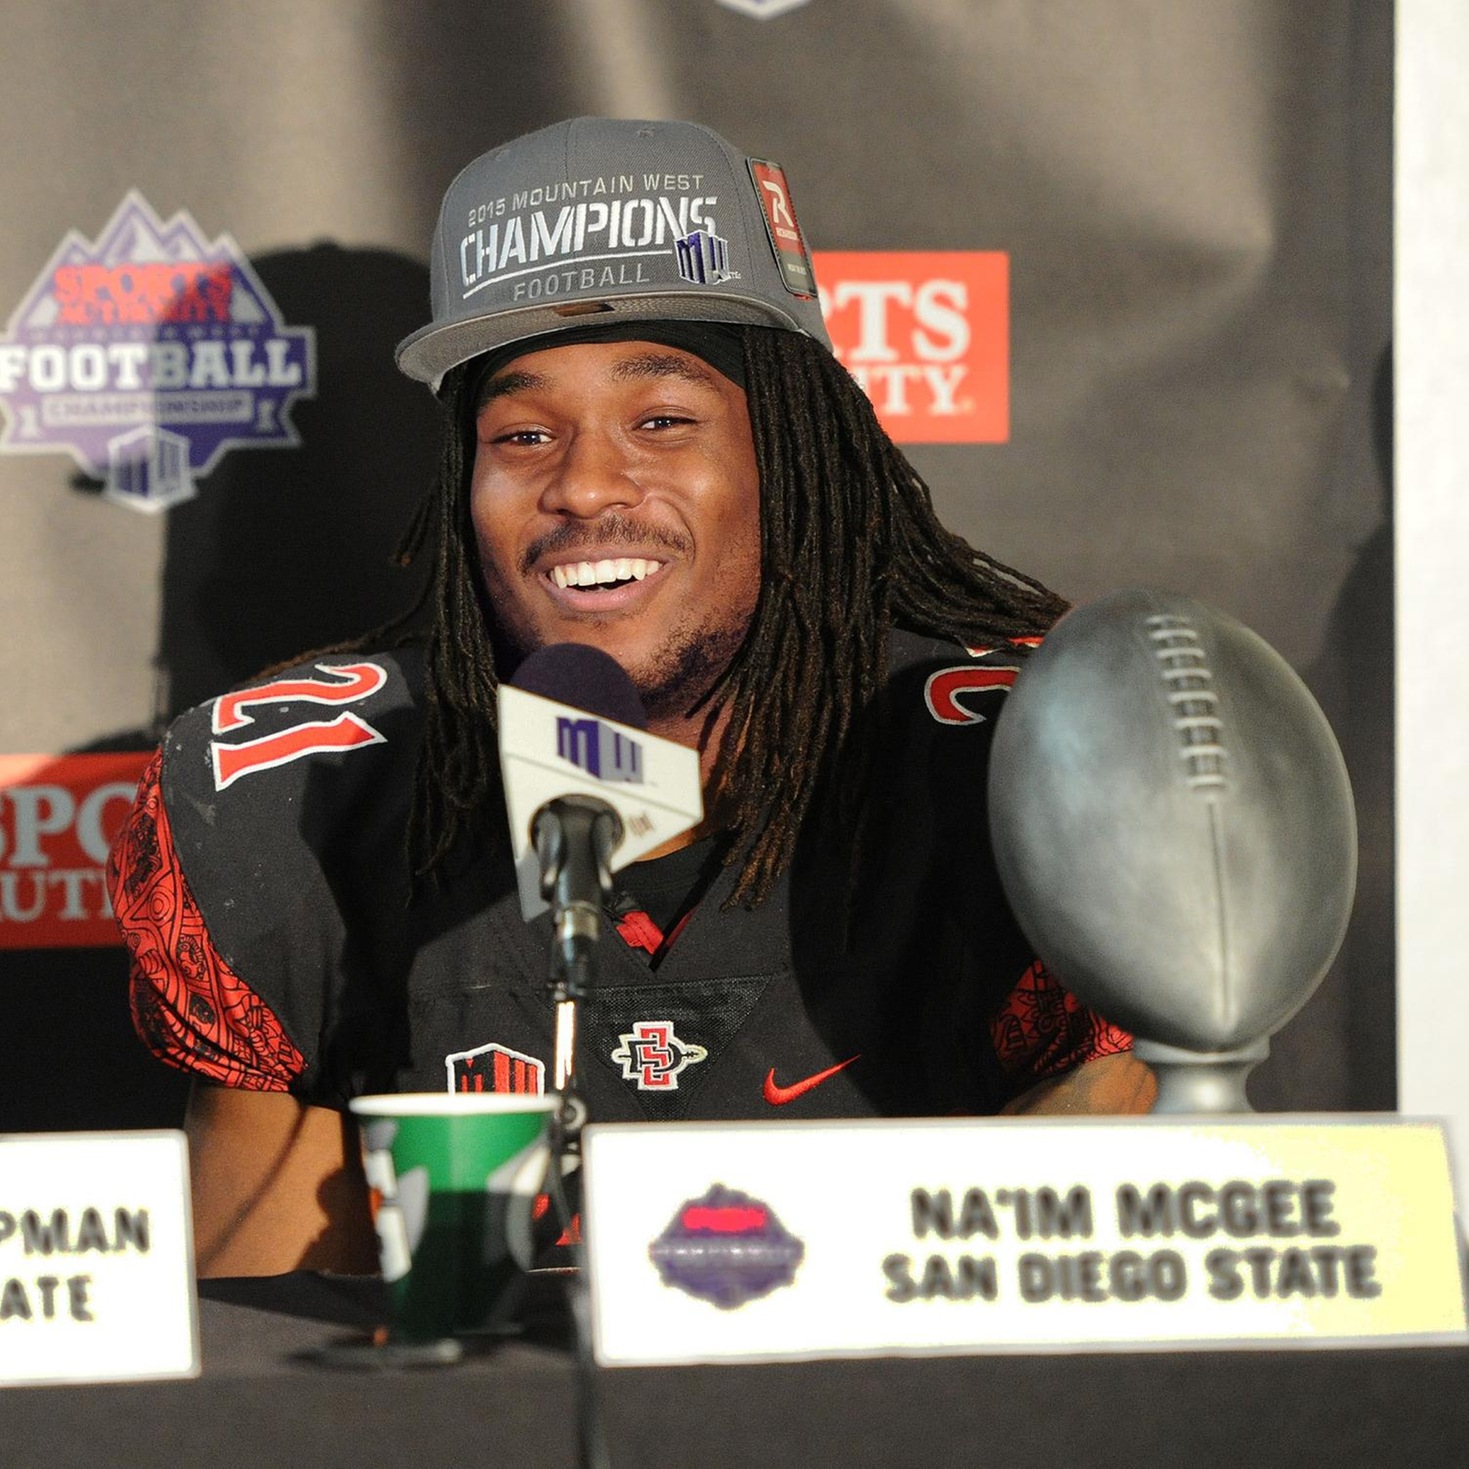 Na'im McGee at a press conference after winning the Mountain West Championship Defensive MVP in 2015.

Photo courtesy of Ernie Anderson/ SDSU Media Relations obtained by Aaron Tolentino